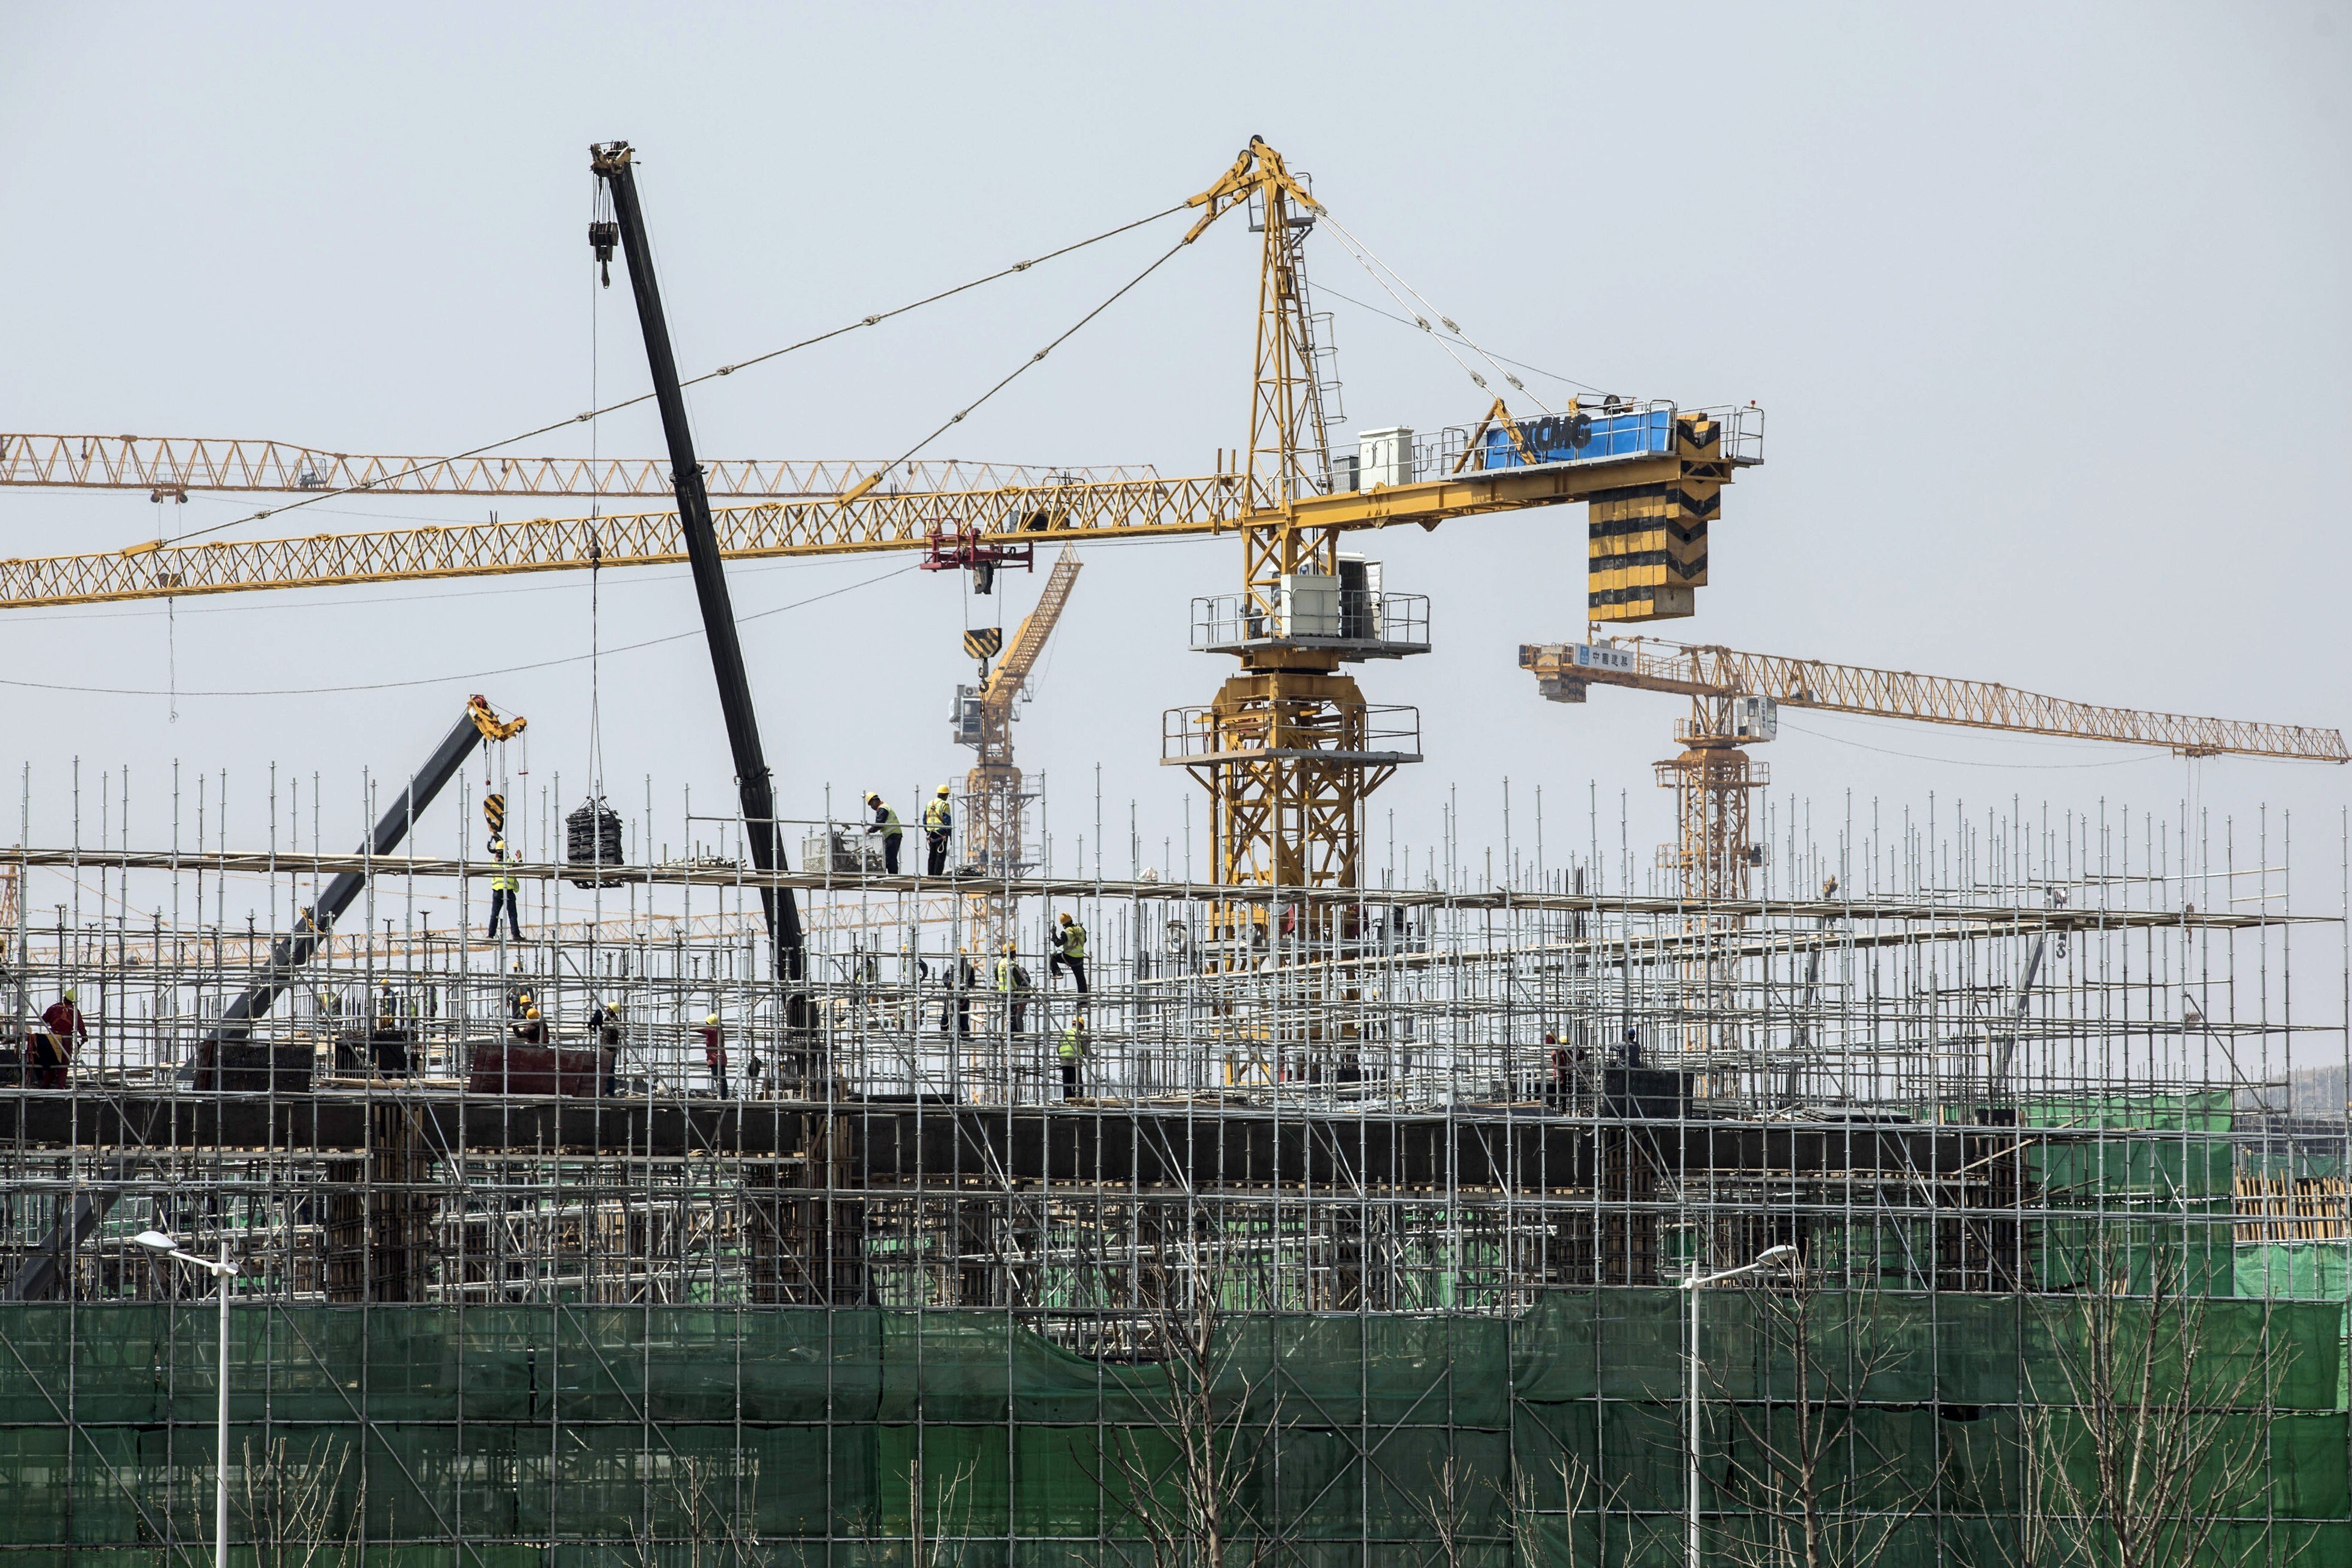 Cranes operate at residential buildings under construction at Dalian Wanda’s Oriental Movie Metropolis film production hub in Qingdao, China, in April, 2018. Photo: Bloomberg